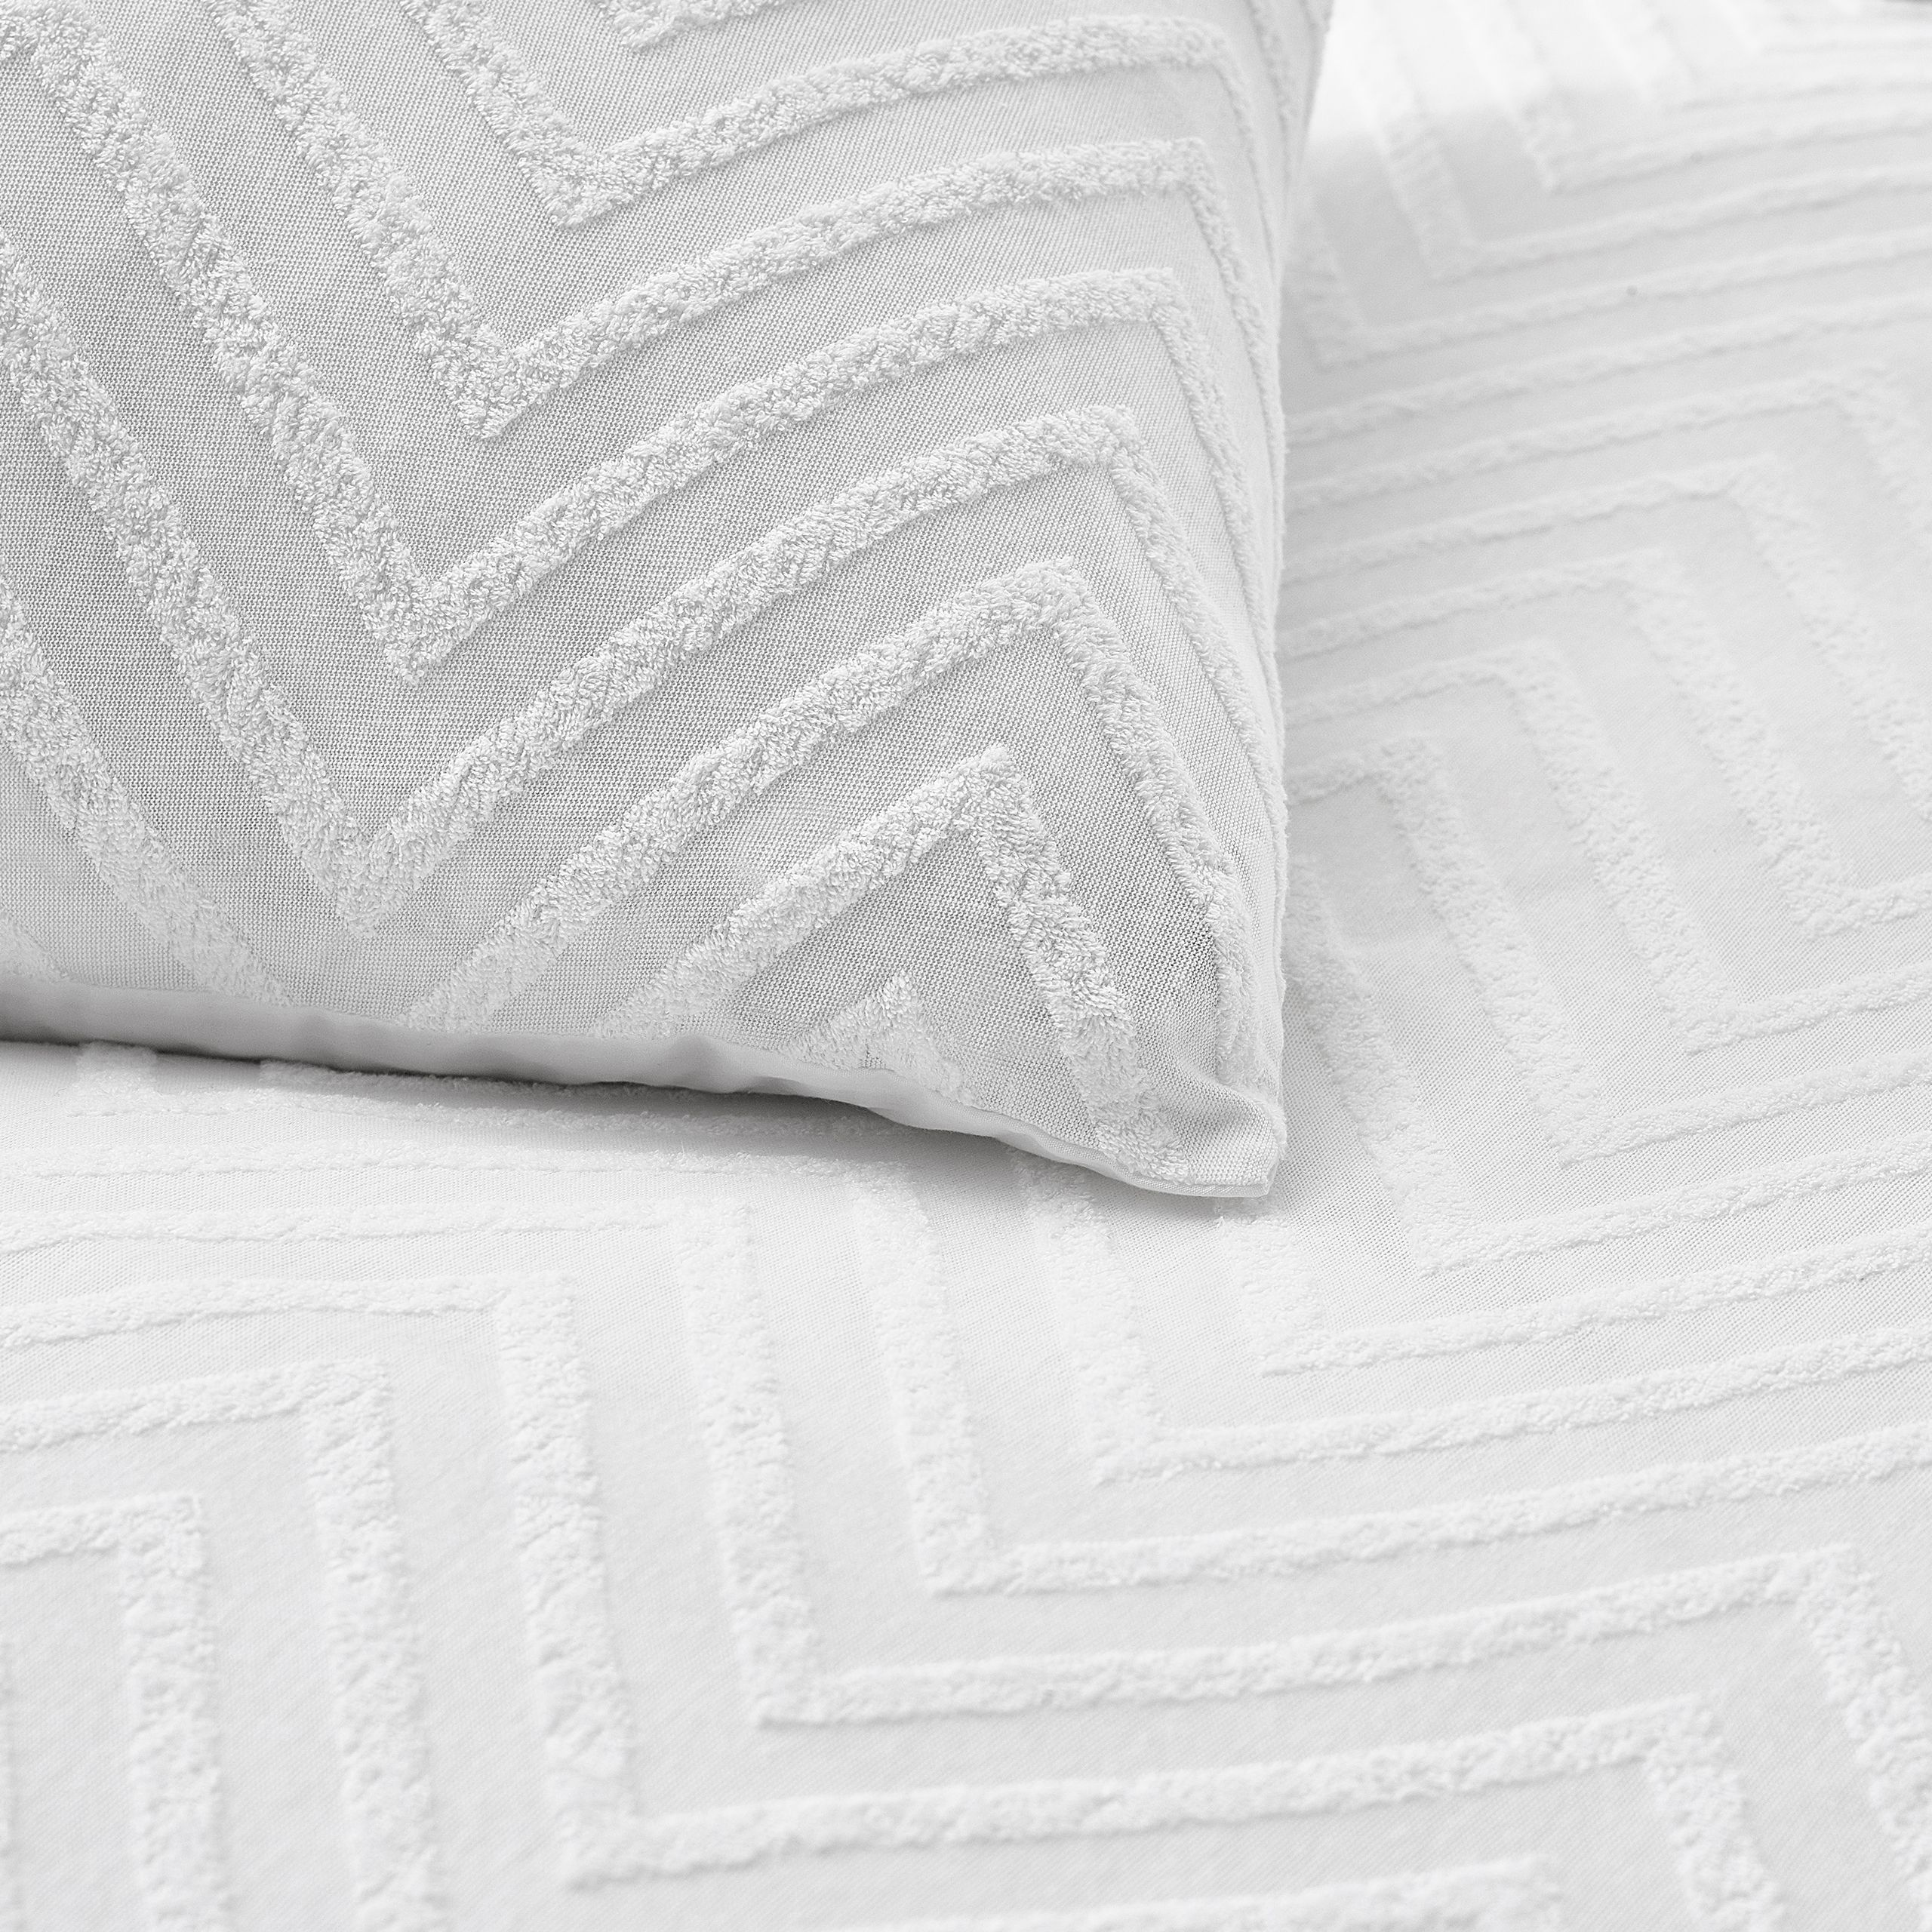 Add texture to your home with the Chevron Tuft duvet cover set. Made with 100% cotton and featuring an angular tufting detail, our chevron bedding will add a cosy, textural look to your bedroom. With a comfortable, breathable cotton percale reverse to help you have a better night’s sleep, this bedding feels as good as it looks.  Includes 1 x pillowcase measuirng 50 x 75cm.